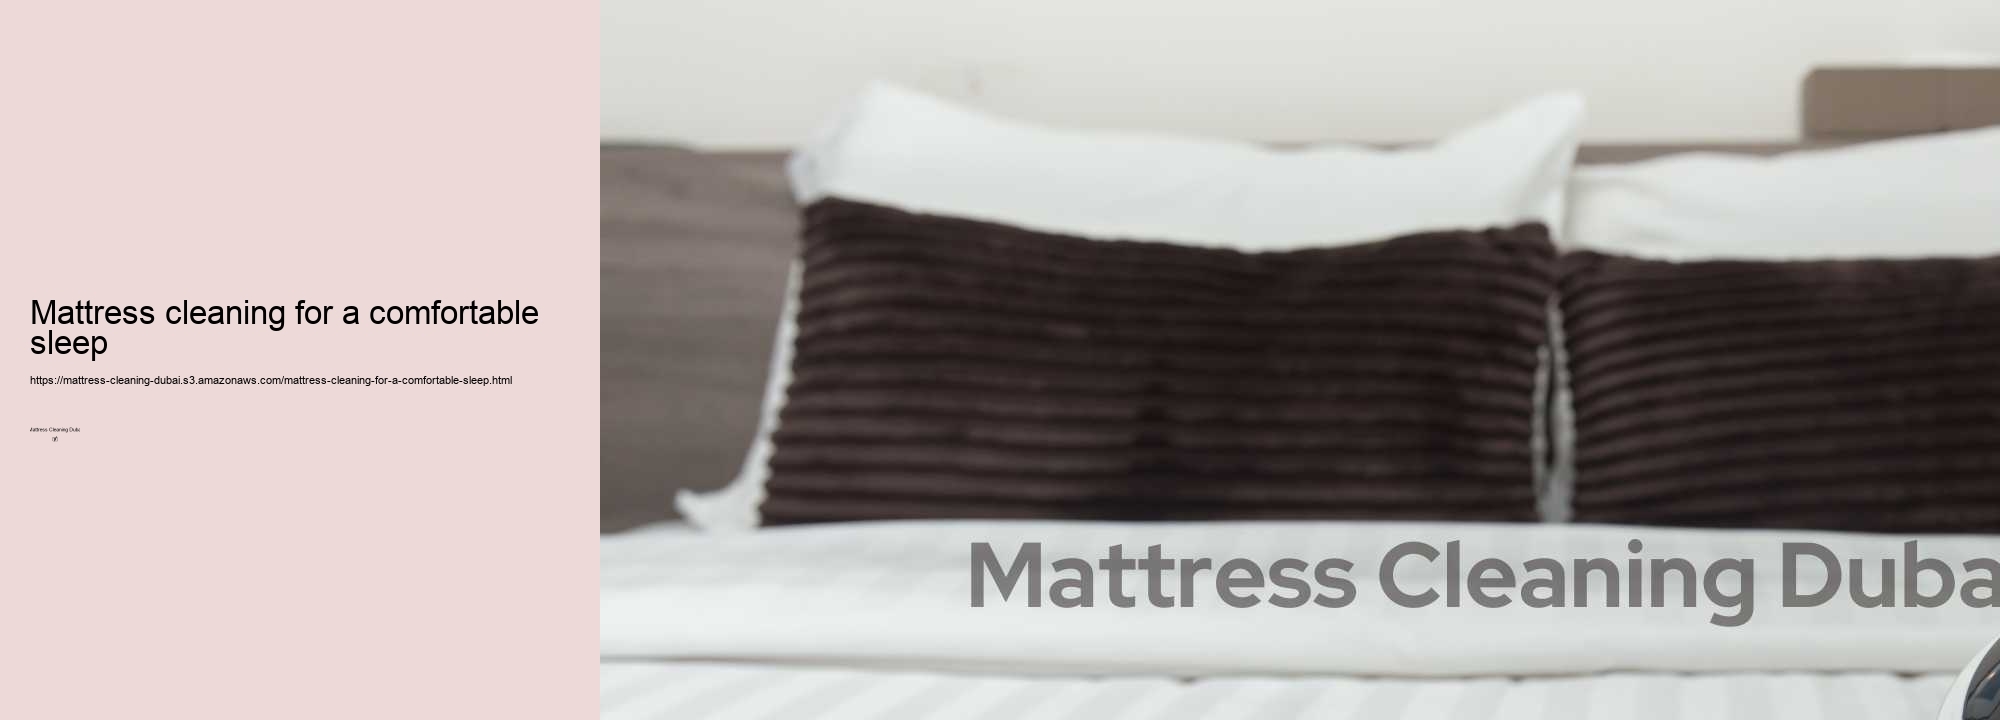 Mattress cleaning for a comfortable sleep